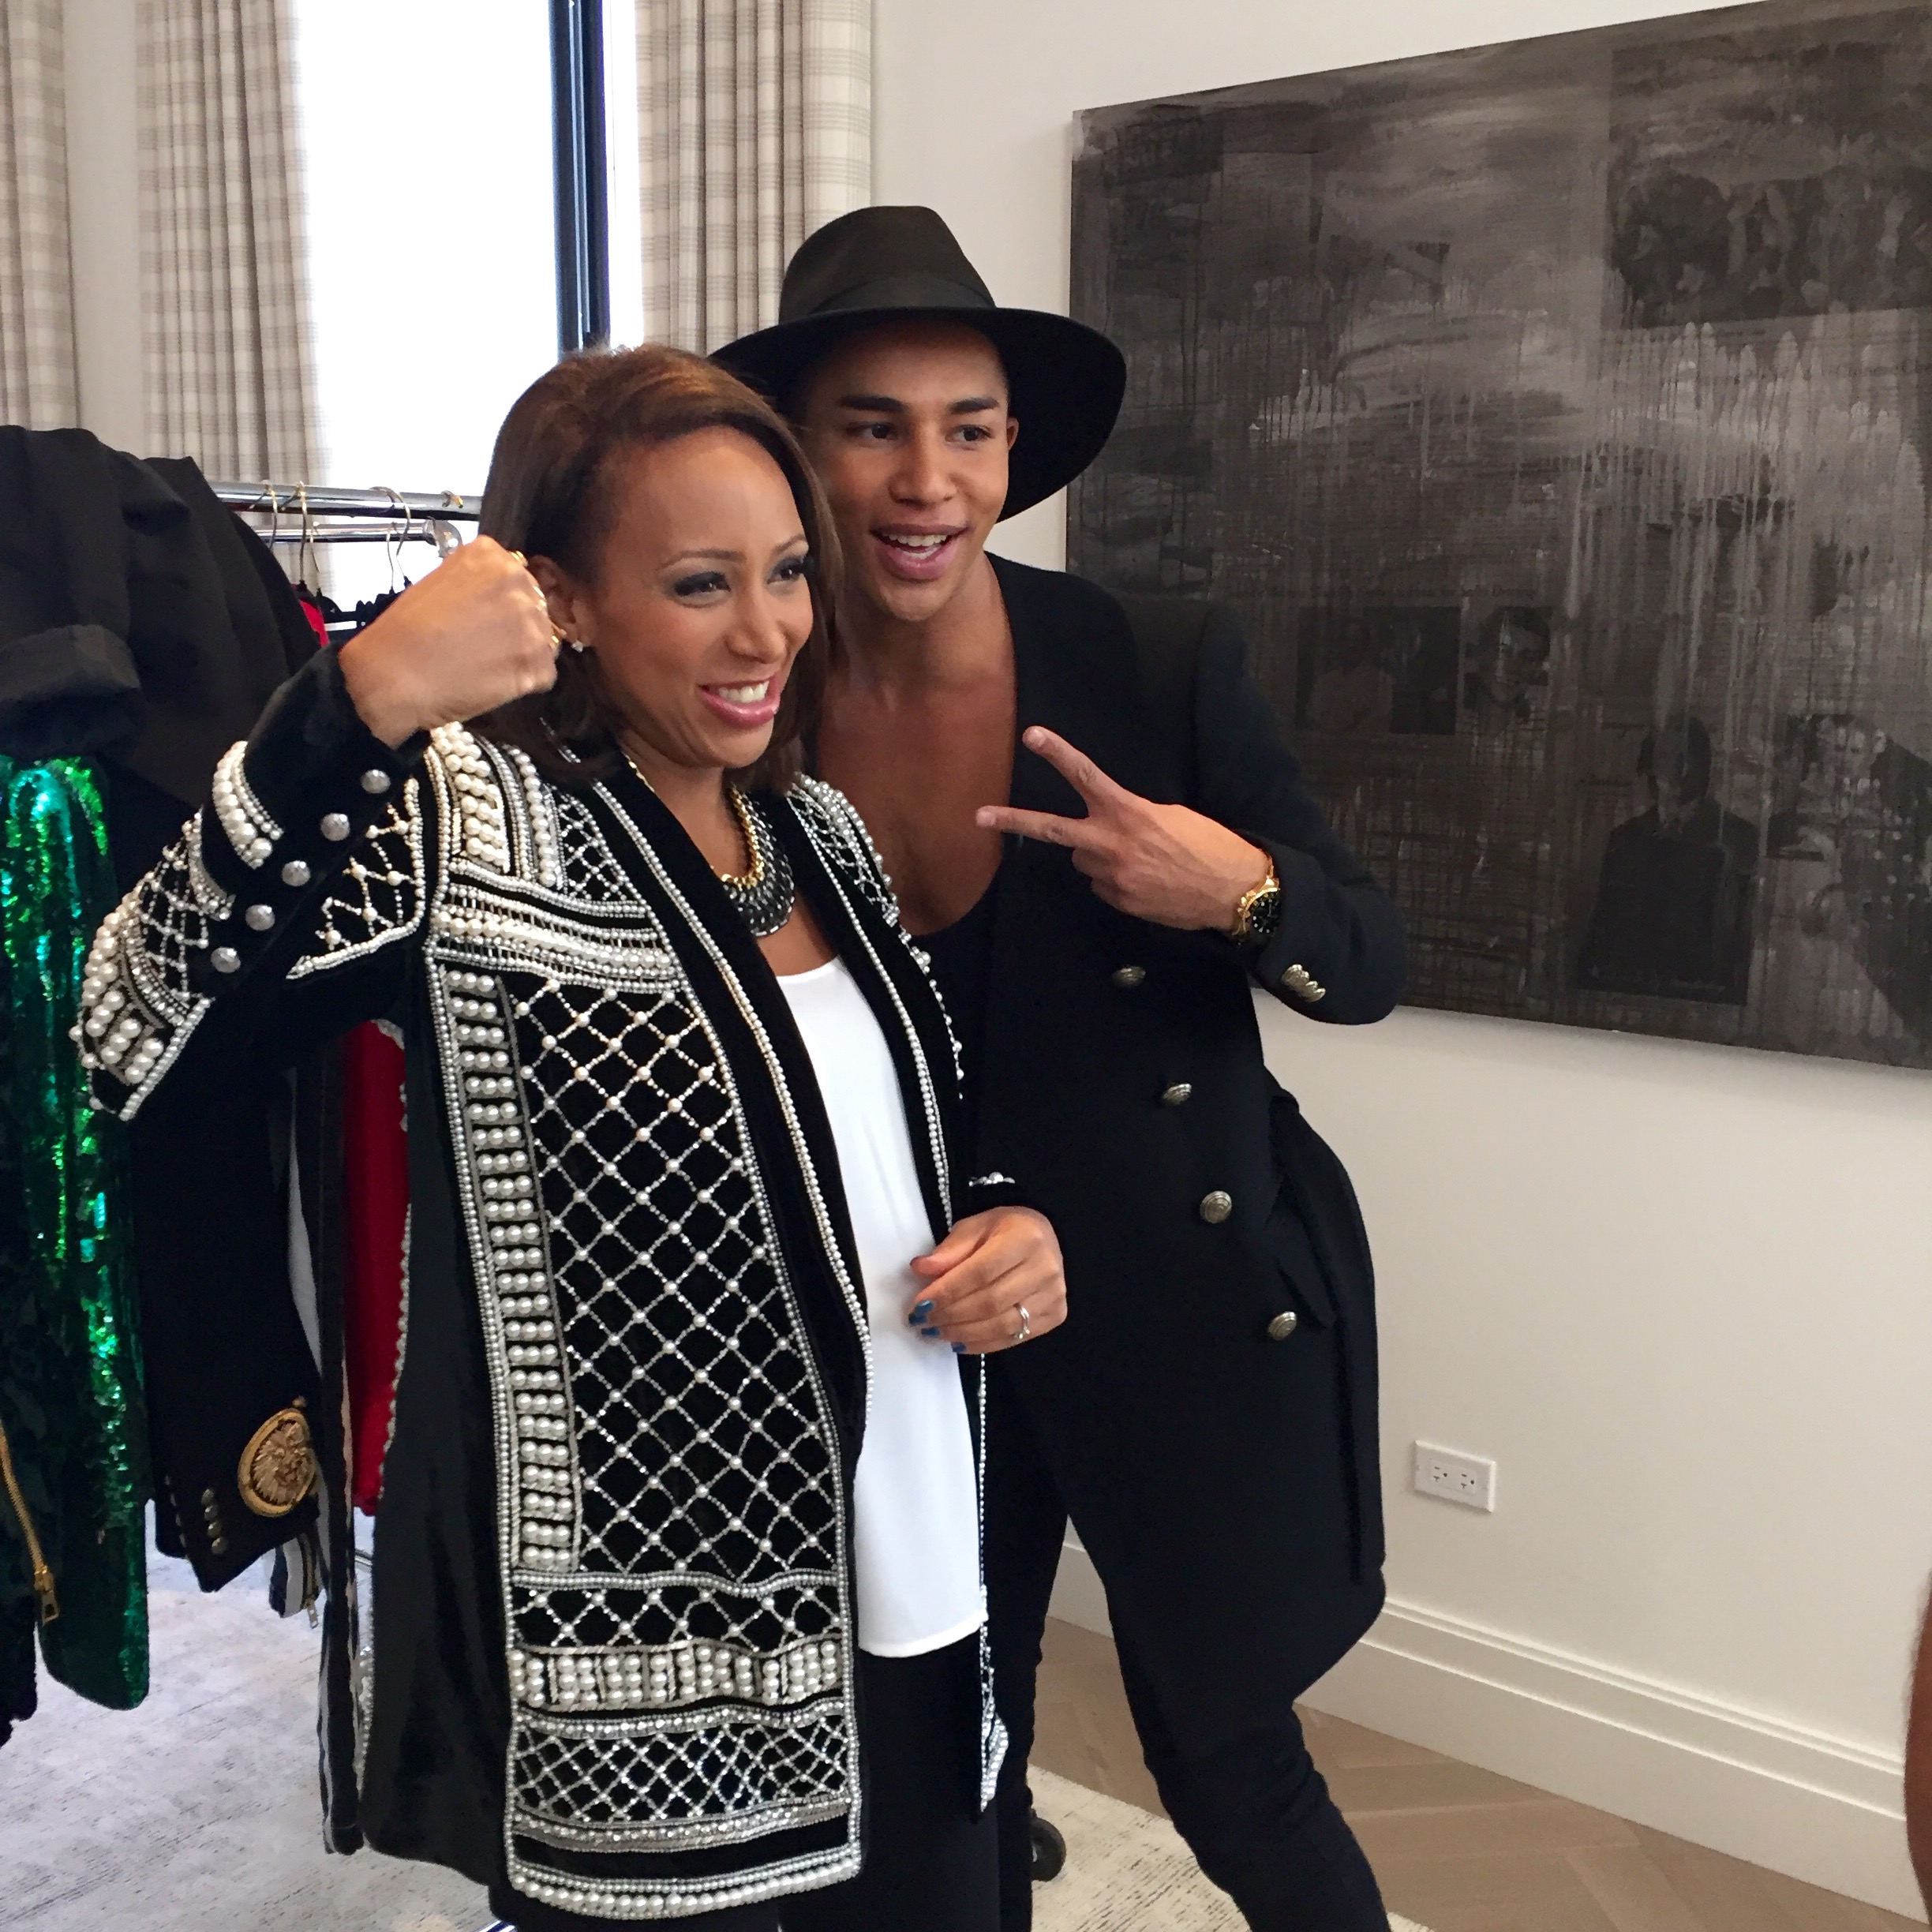 PHOTO: Balmain creative director Olivier Rousteing spoke to ABC News' Mara Schiavocampo about his much-anticipated collaboration with H&M.